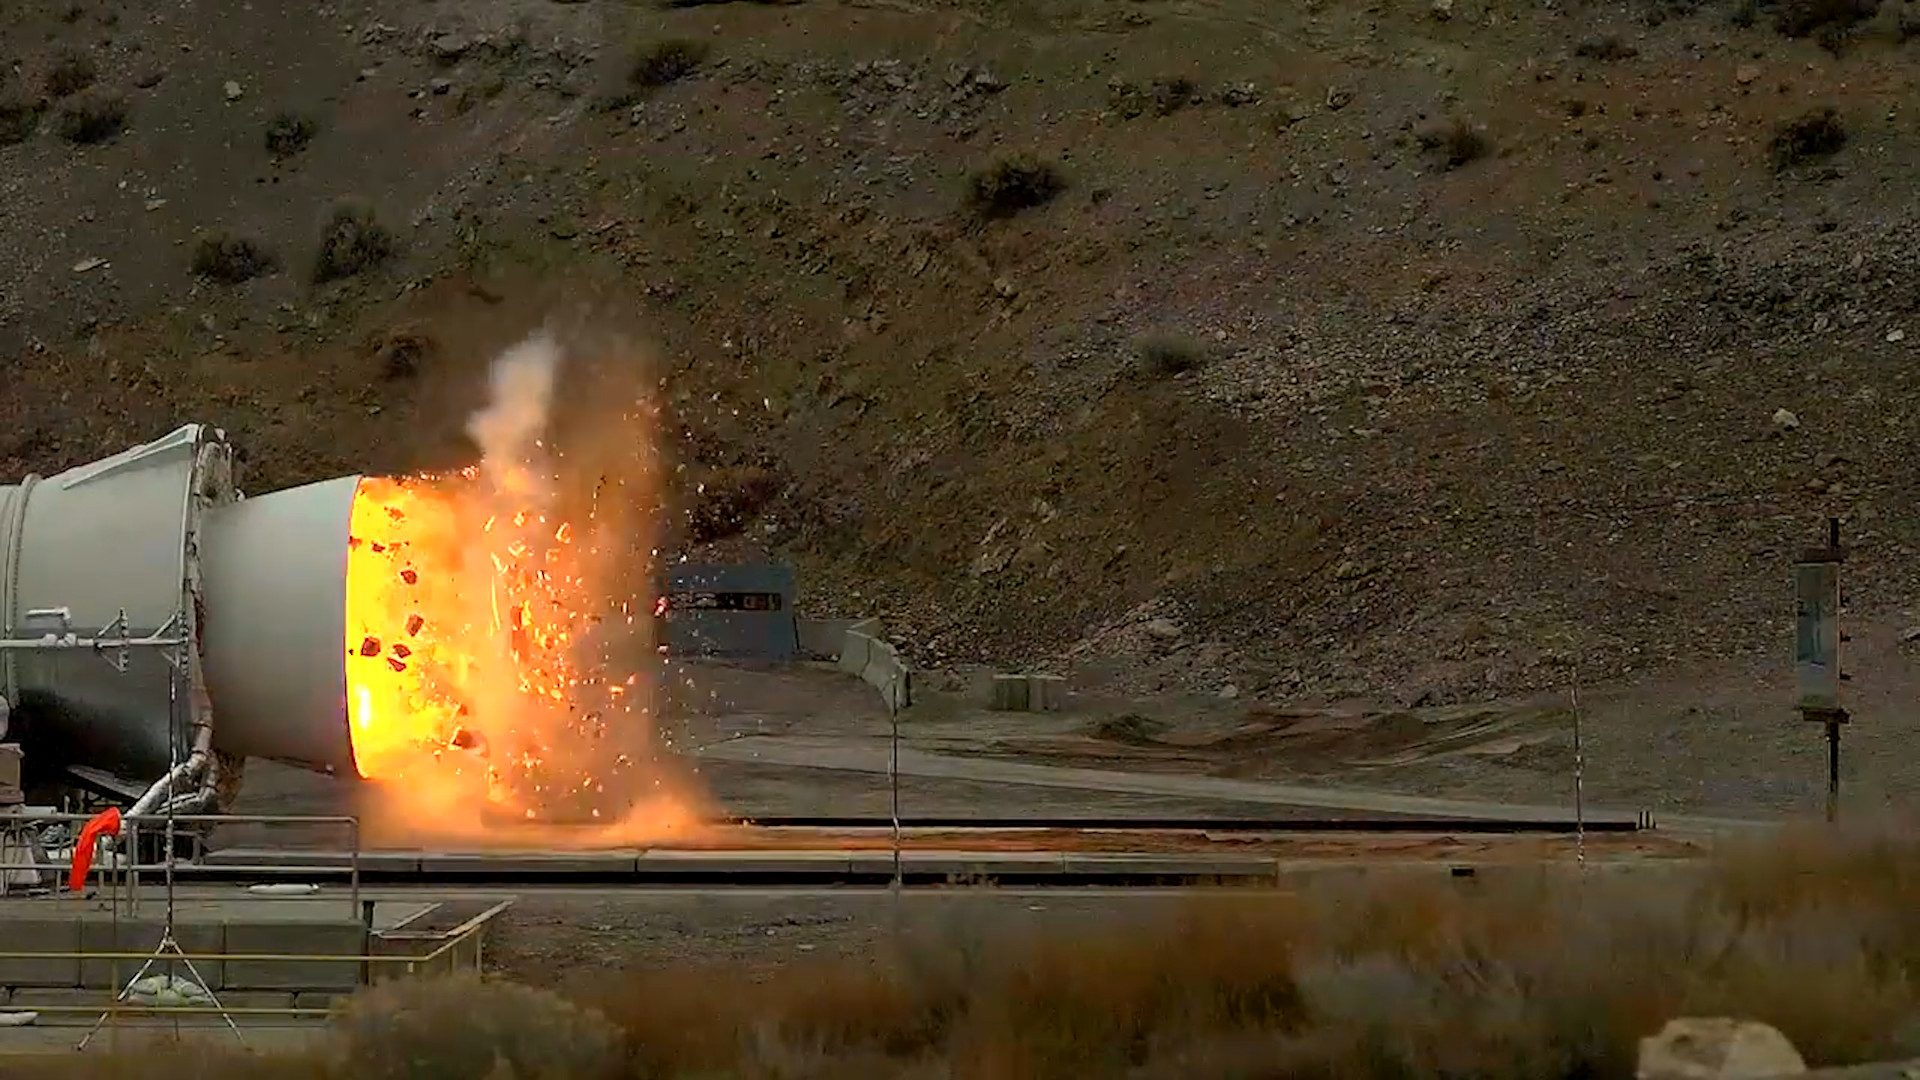 wired_nasa-s-testing-its-biggest-flame-thrower-er-rocket-ever-2